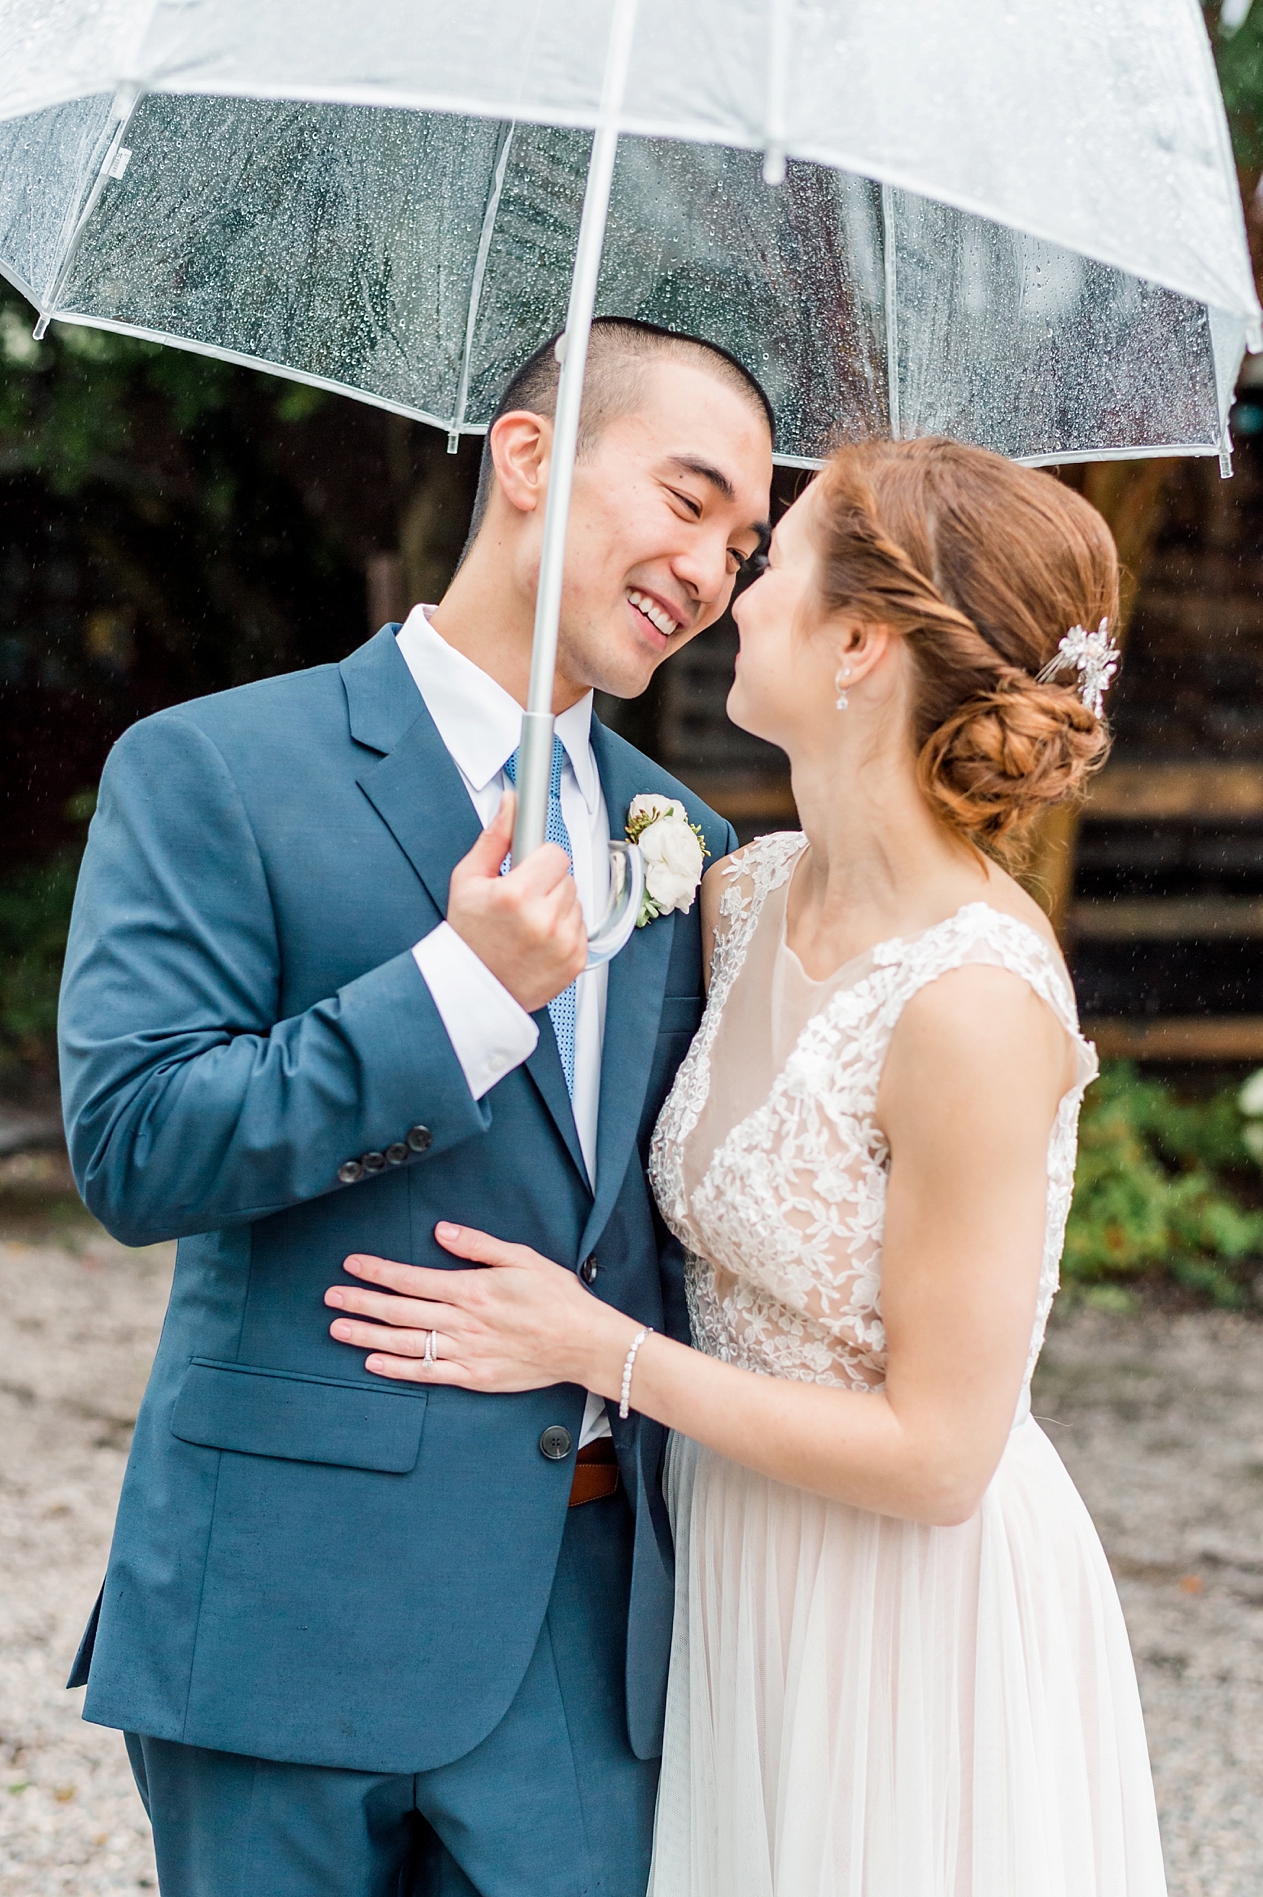 A Rainy Day Wedding full of Relaxed and Romantic Details at Historic Londontown Gardens by Maryland Fine Art Photographer Lauren R Swann